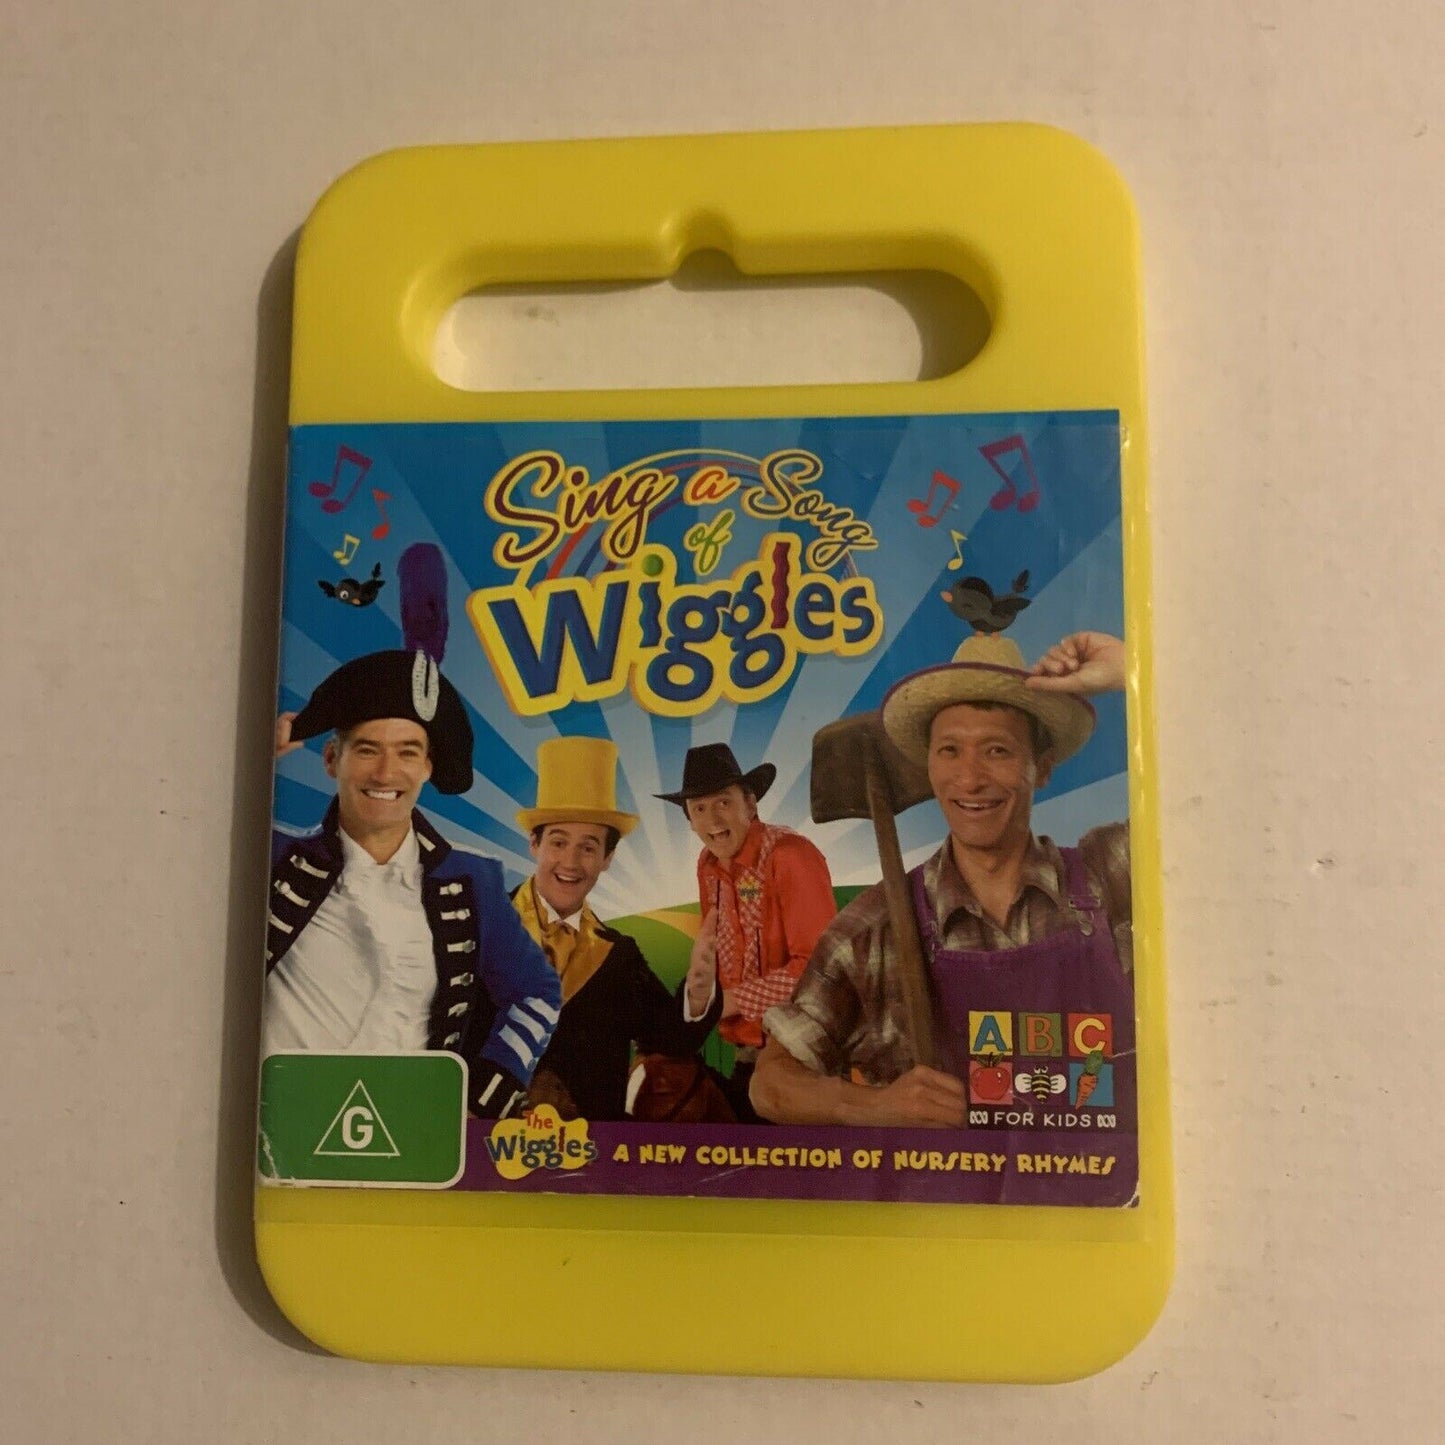 The Wiggles - Sing a Song of Wiggles (DVD, 2008) for sale online